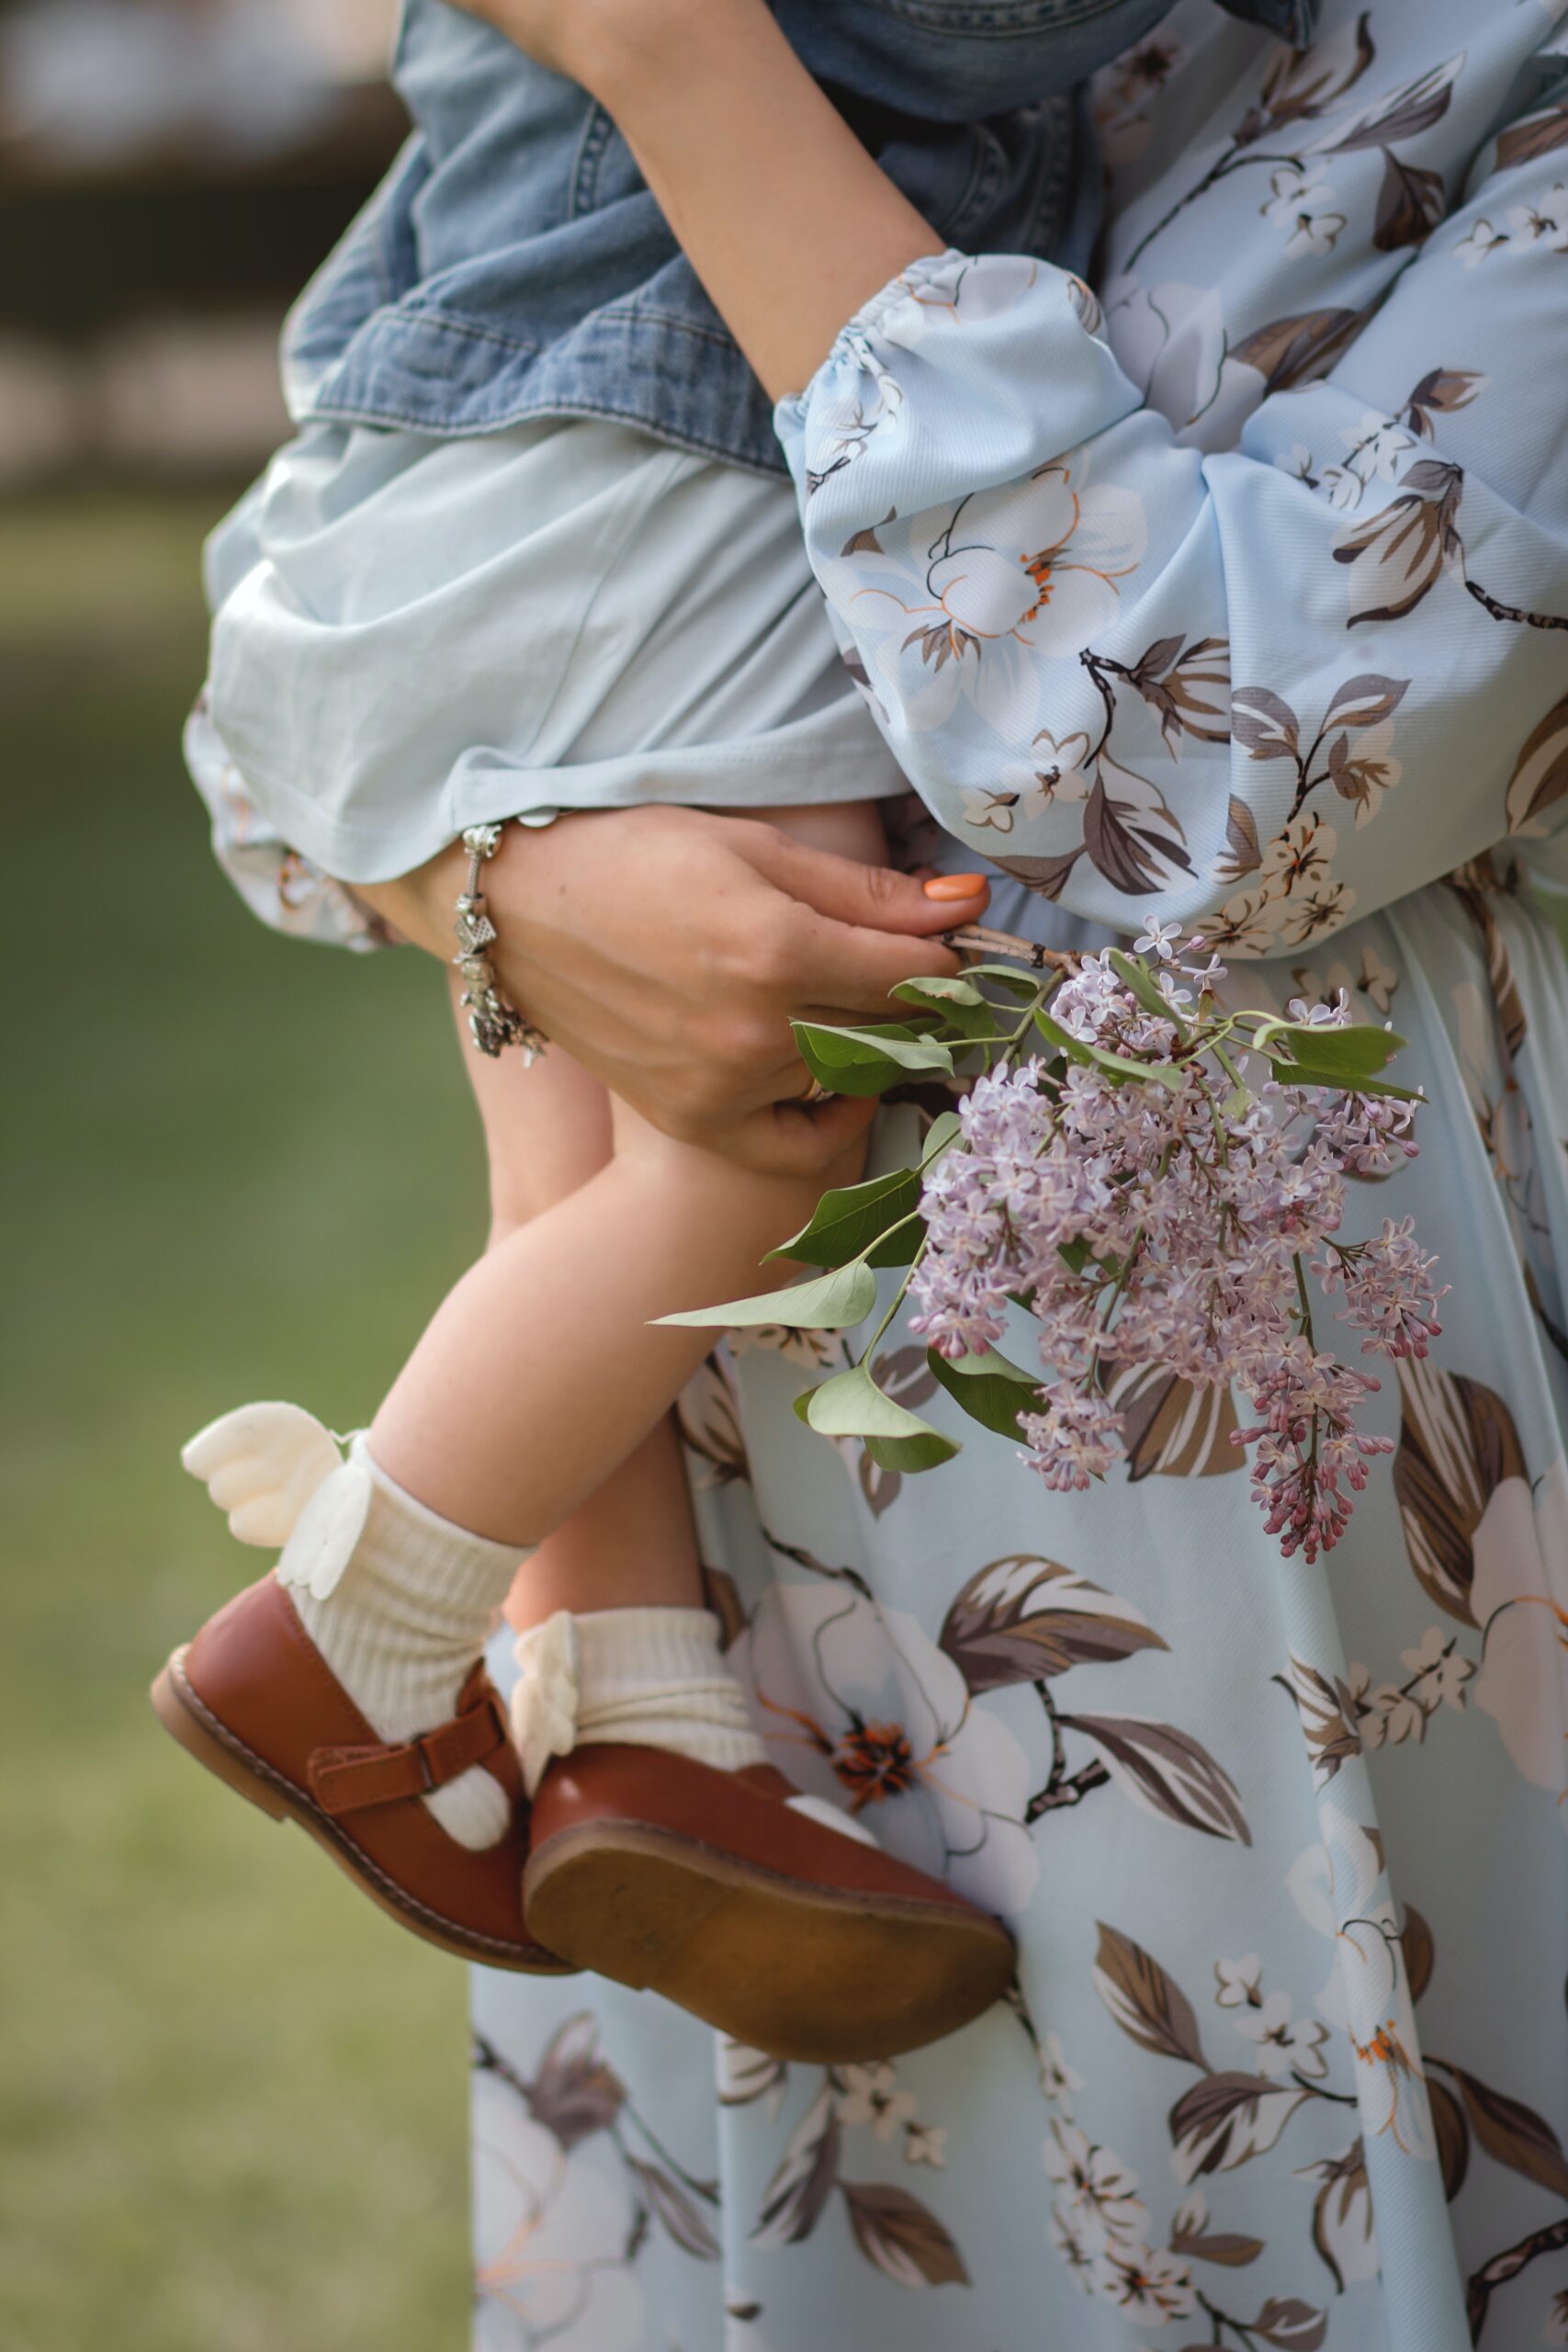 Woman in a floral dress holding a baby